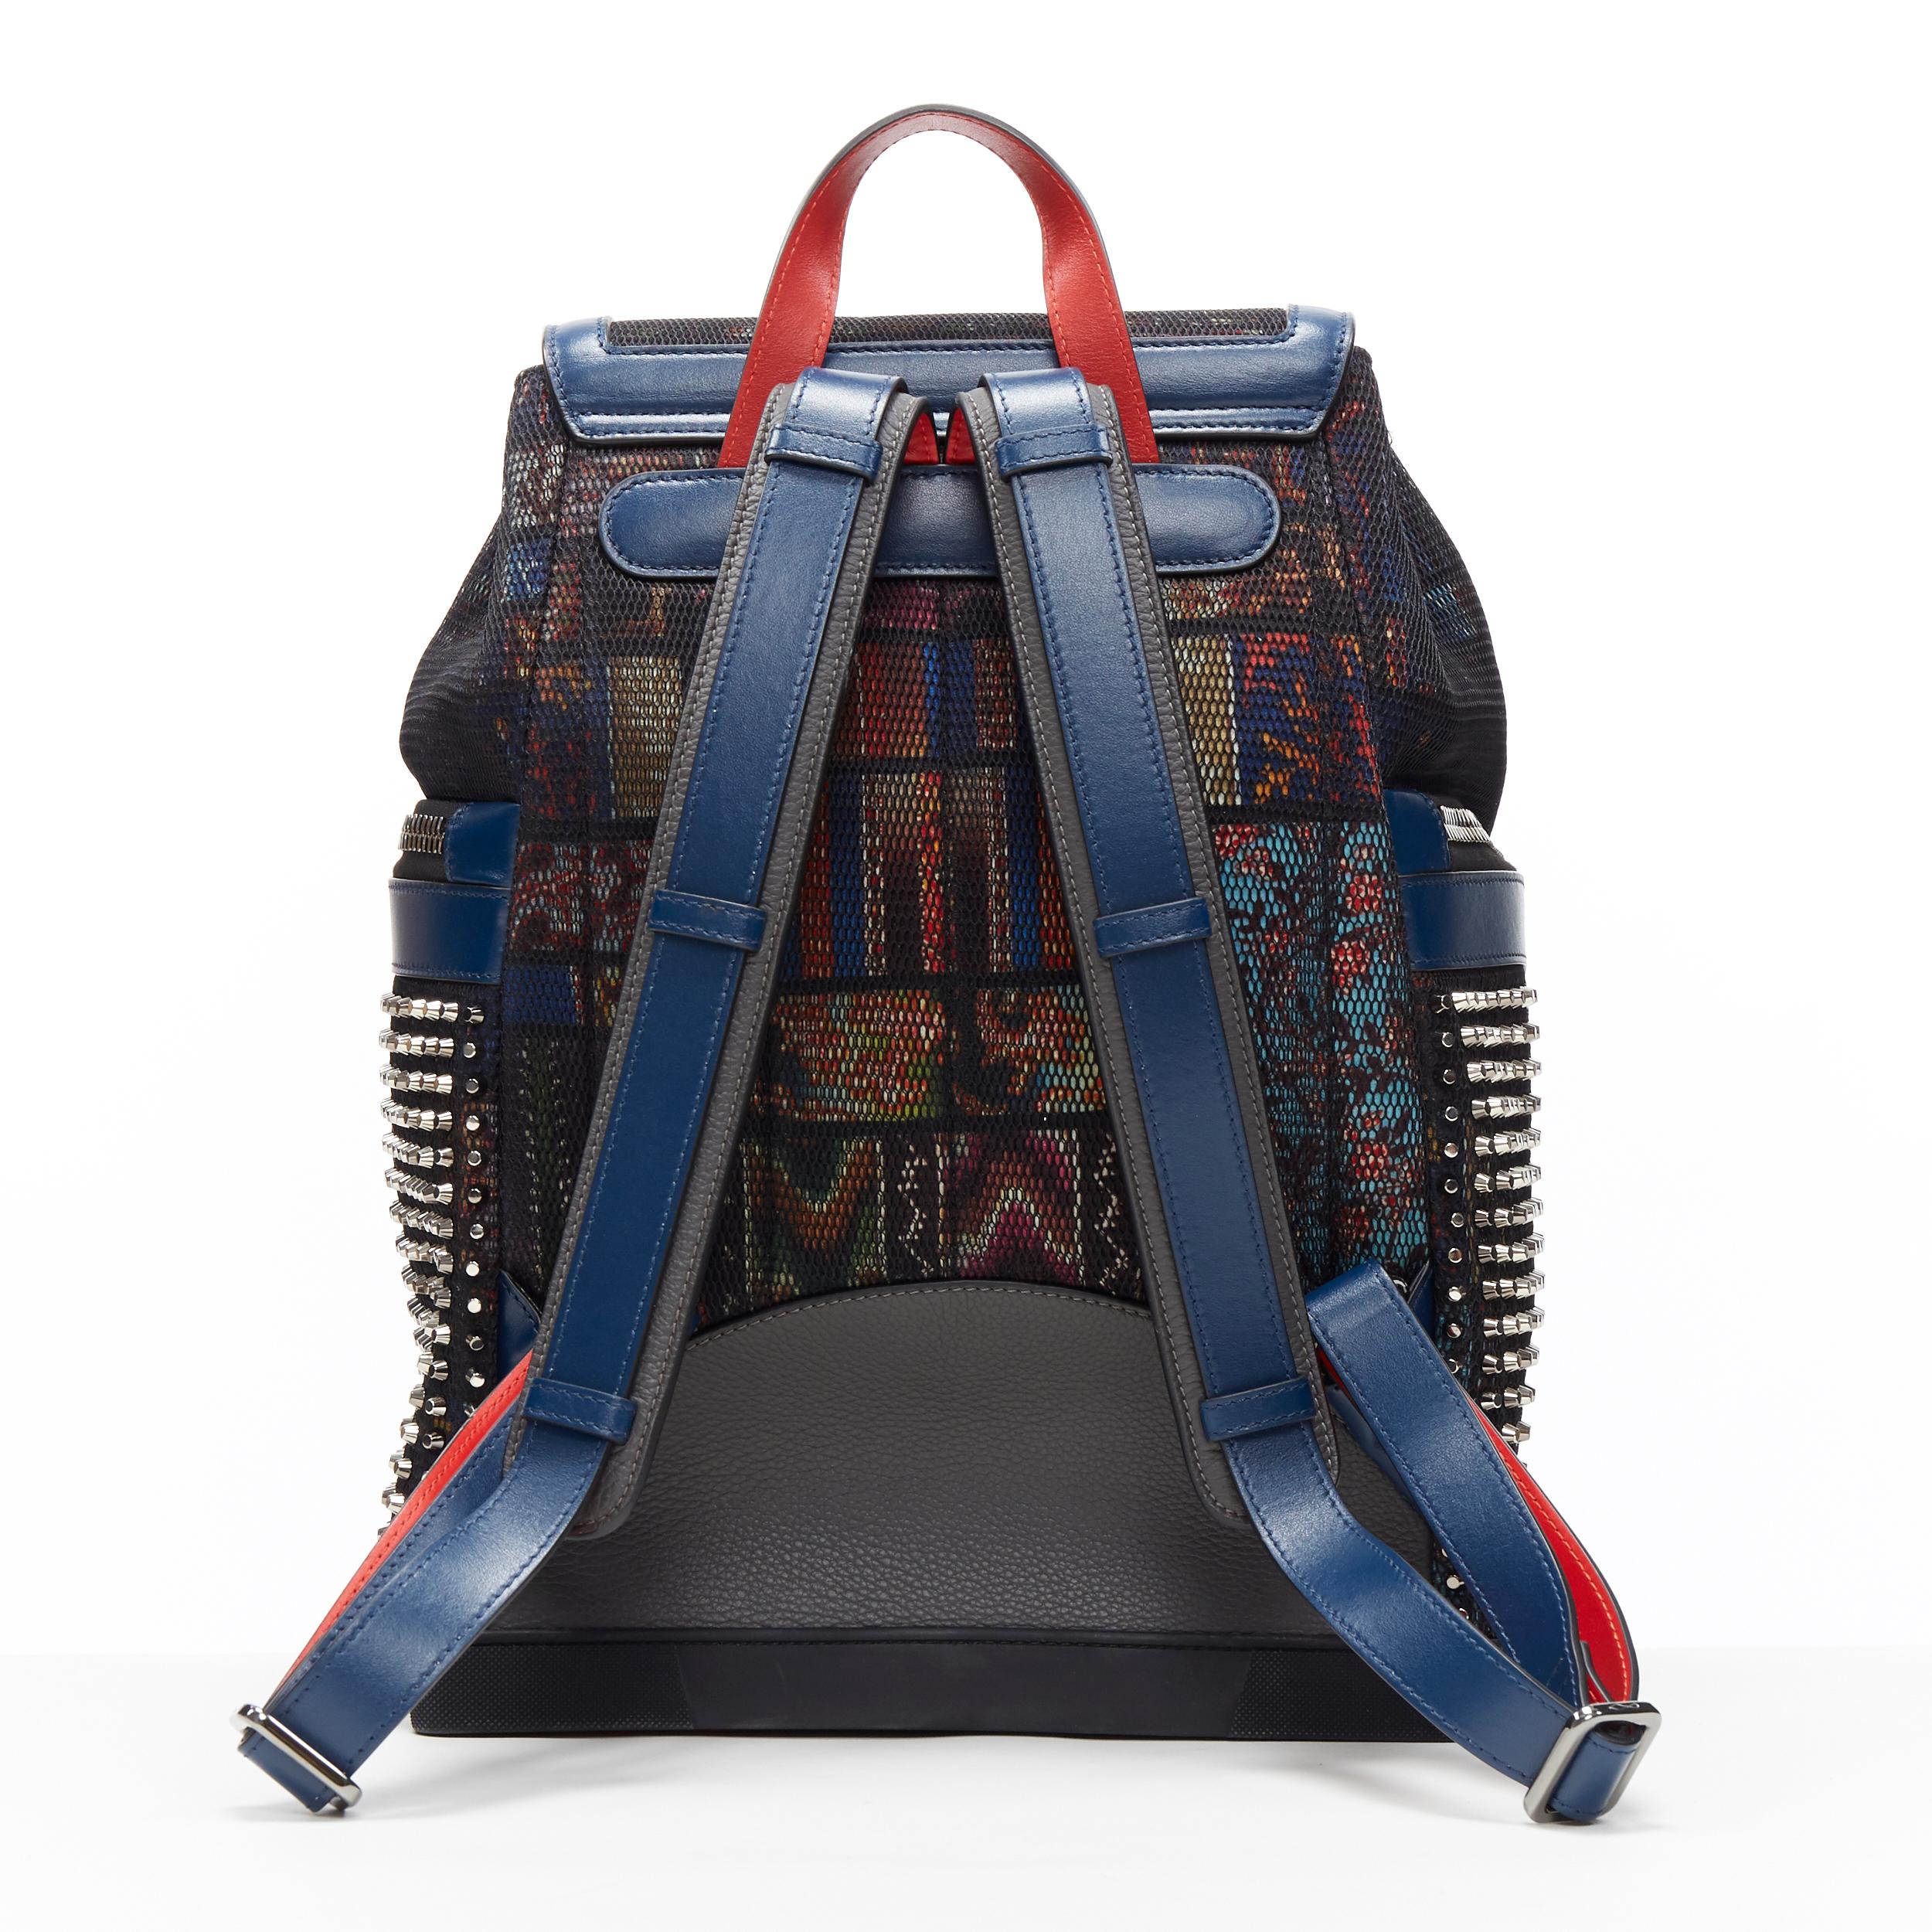 Black CHRISTIAN LOUBOUTIN Explorafunk studded printed mesh leather trimmed backpack